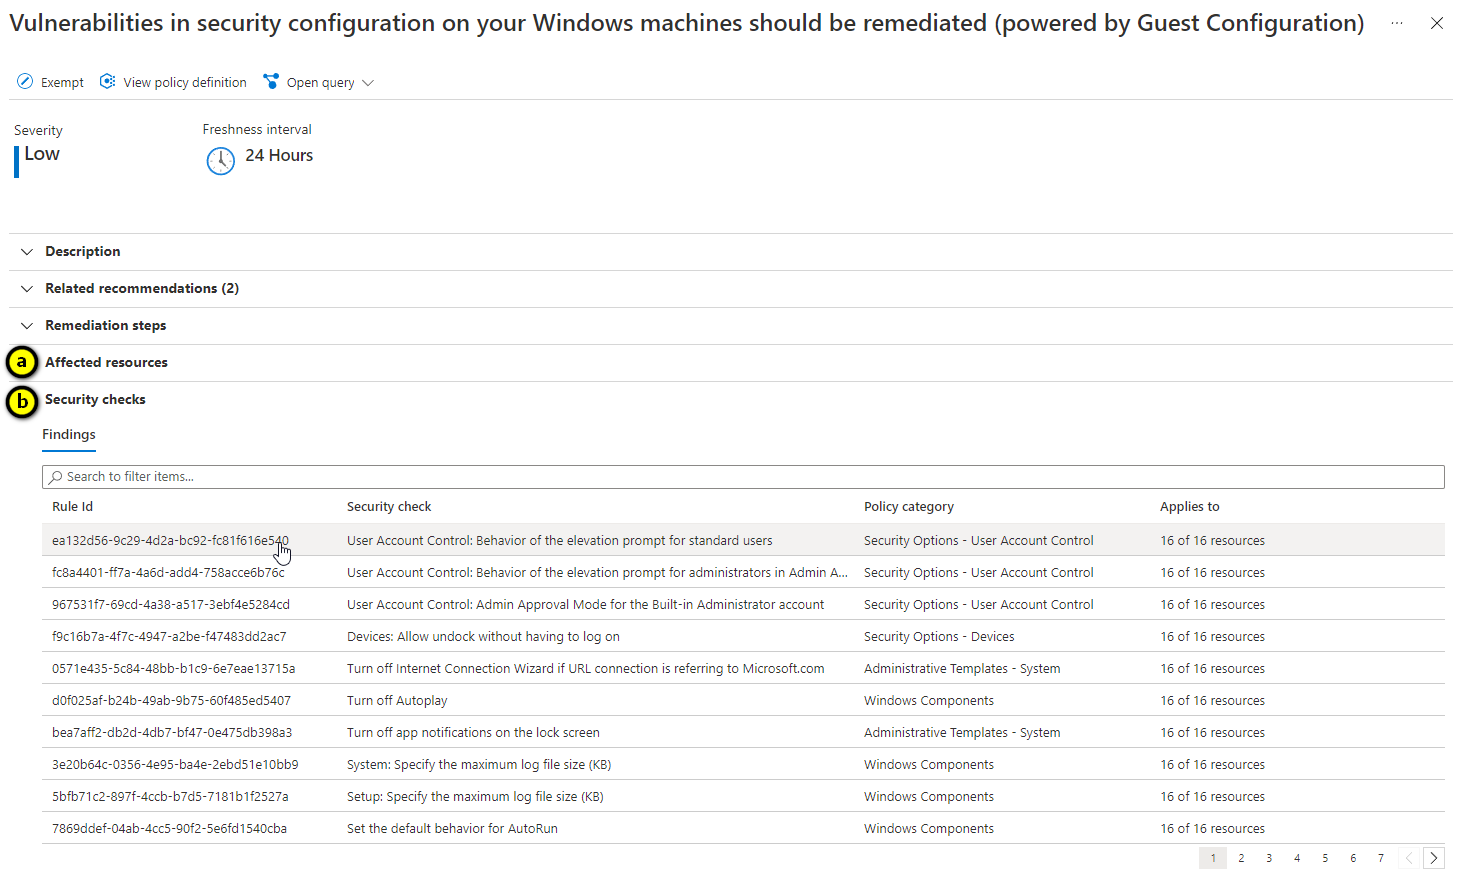 Recommendation details page for the Windows recommendation about vulnerabilities in the baseline configuration of Windows machines.